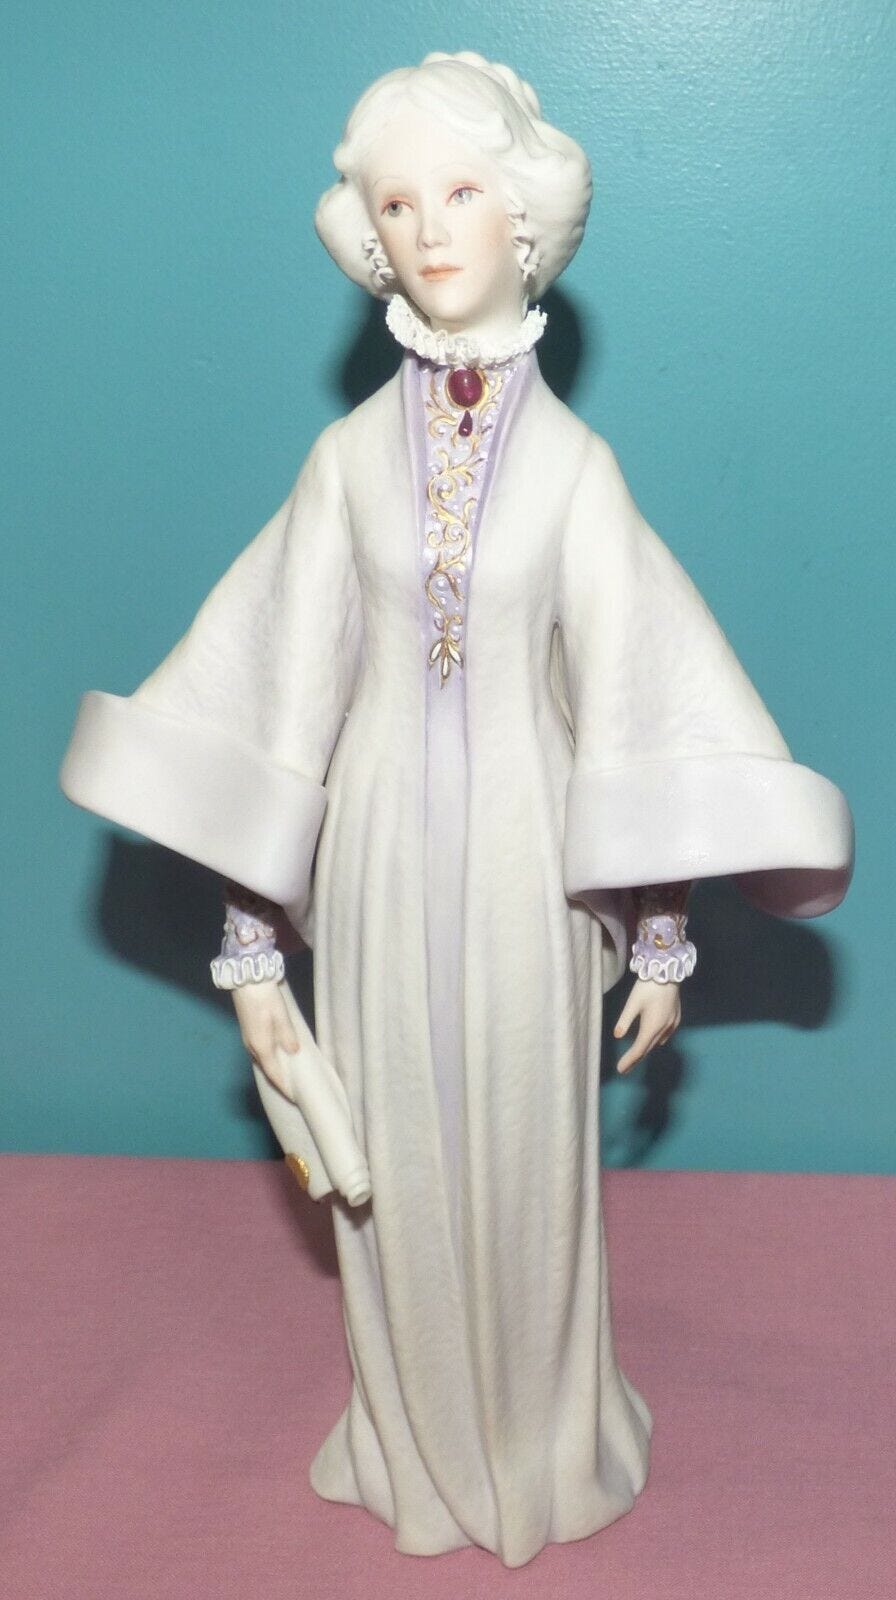 A porcelain Portia from The Merchant of Venice